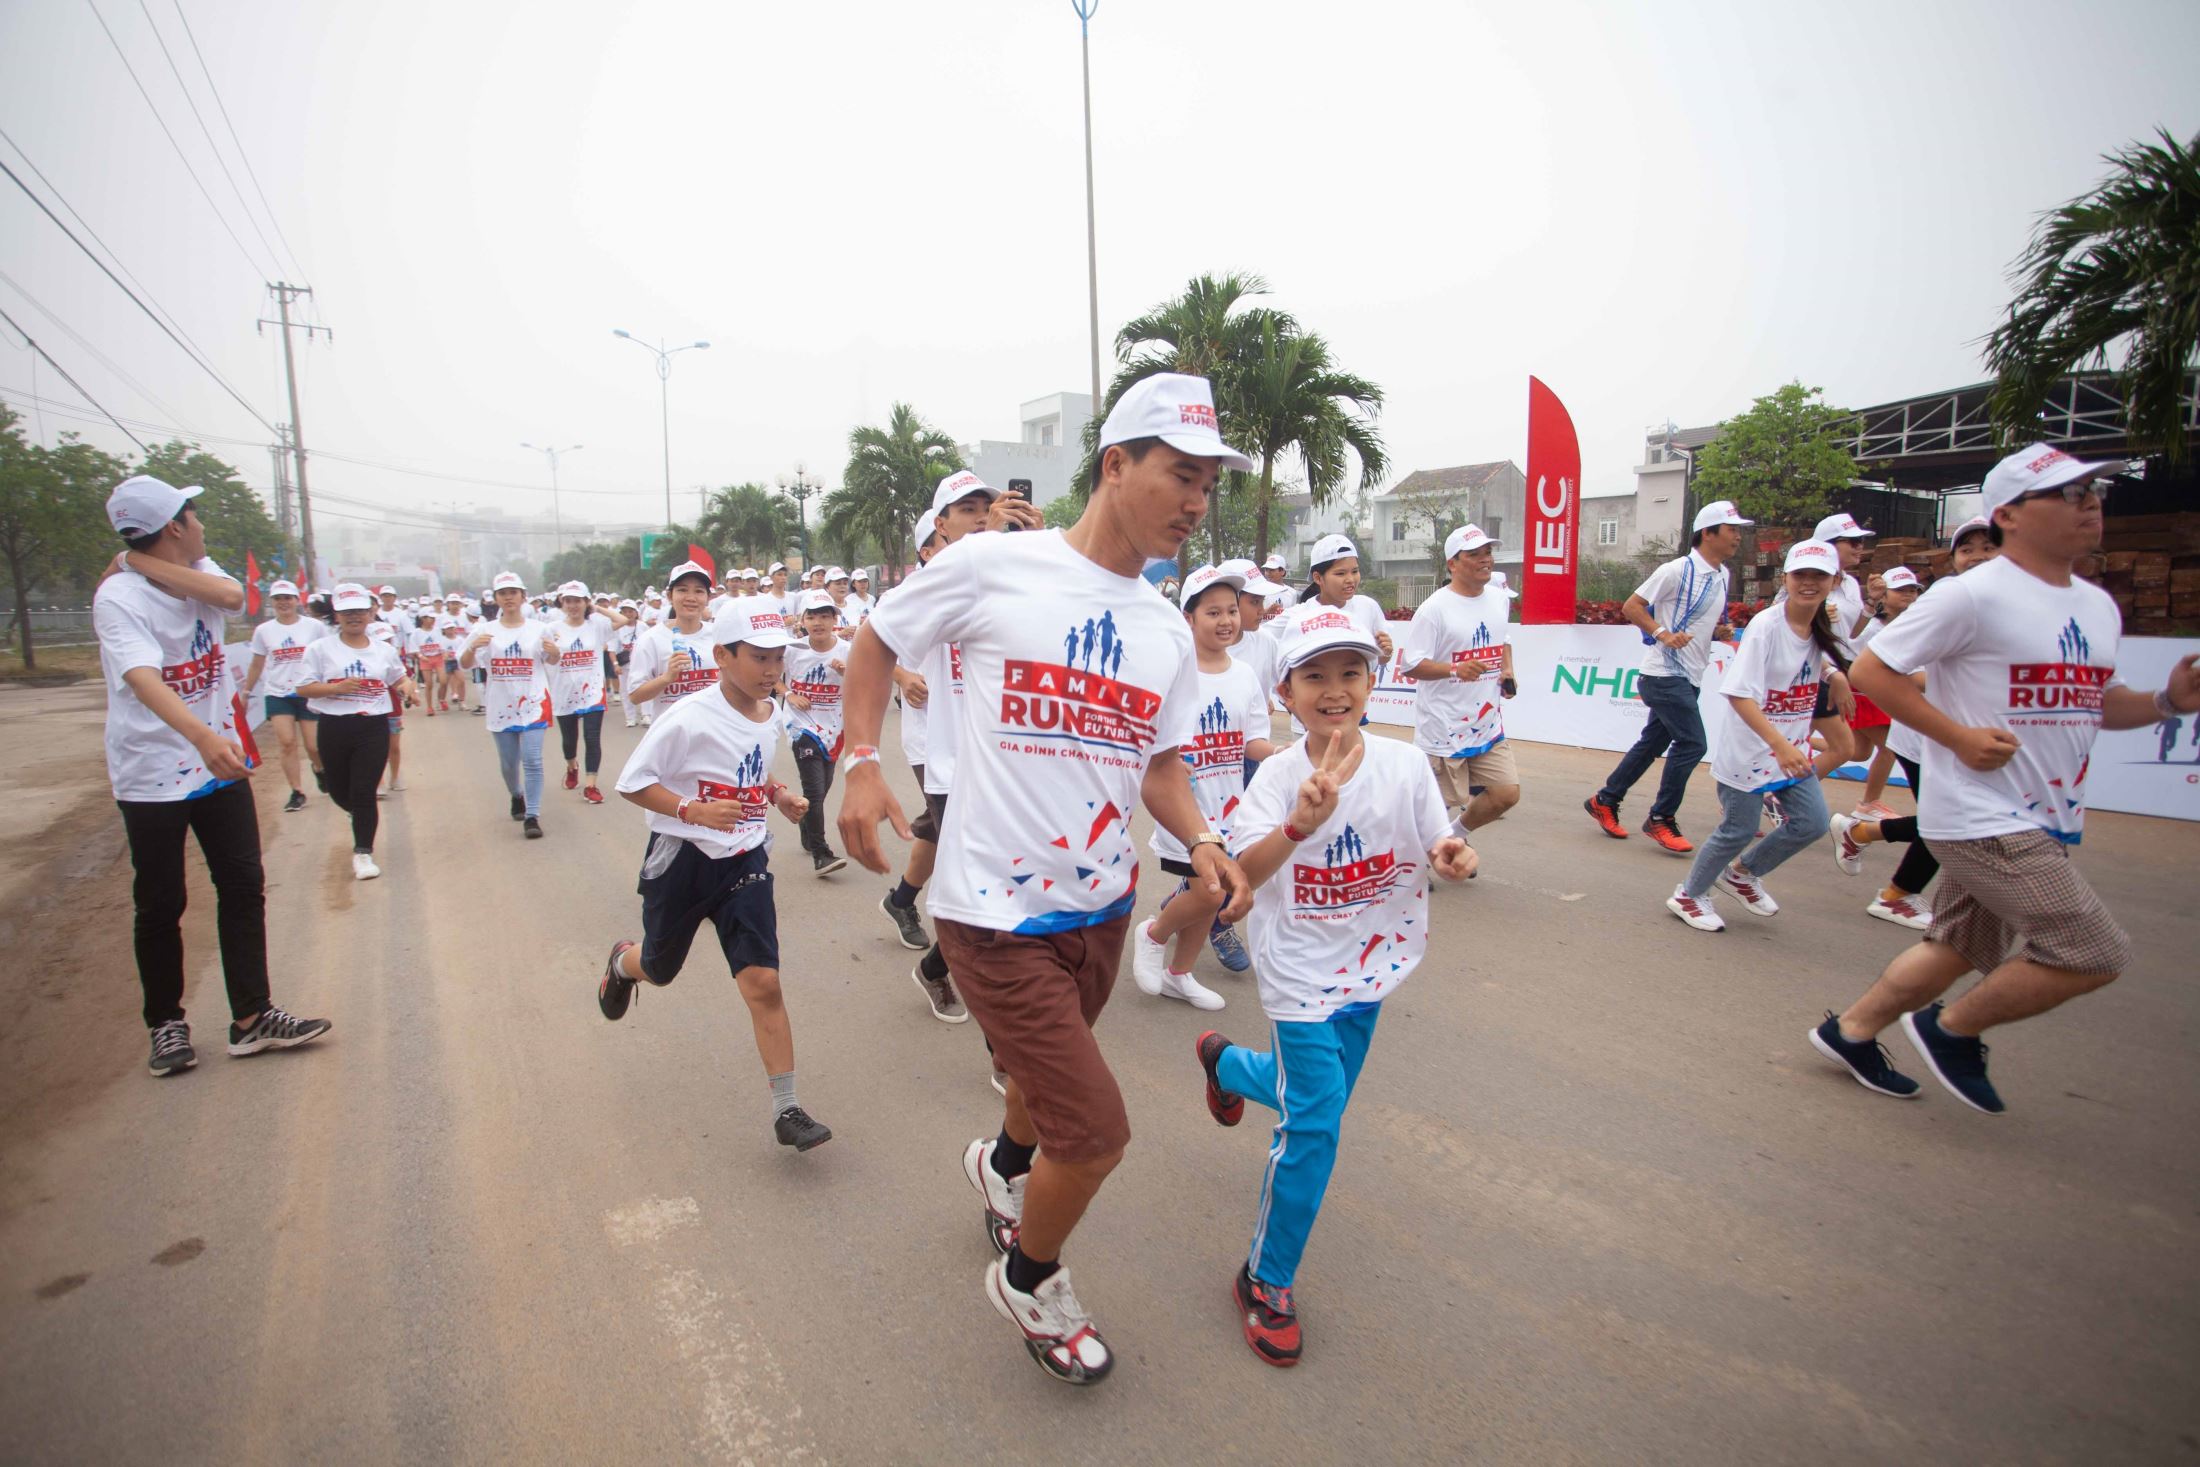 Overview of the festival “Family run for the future”